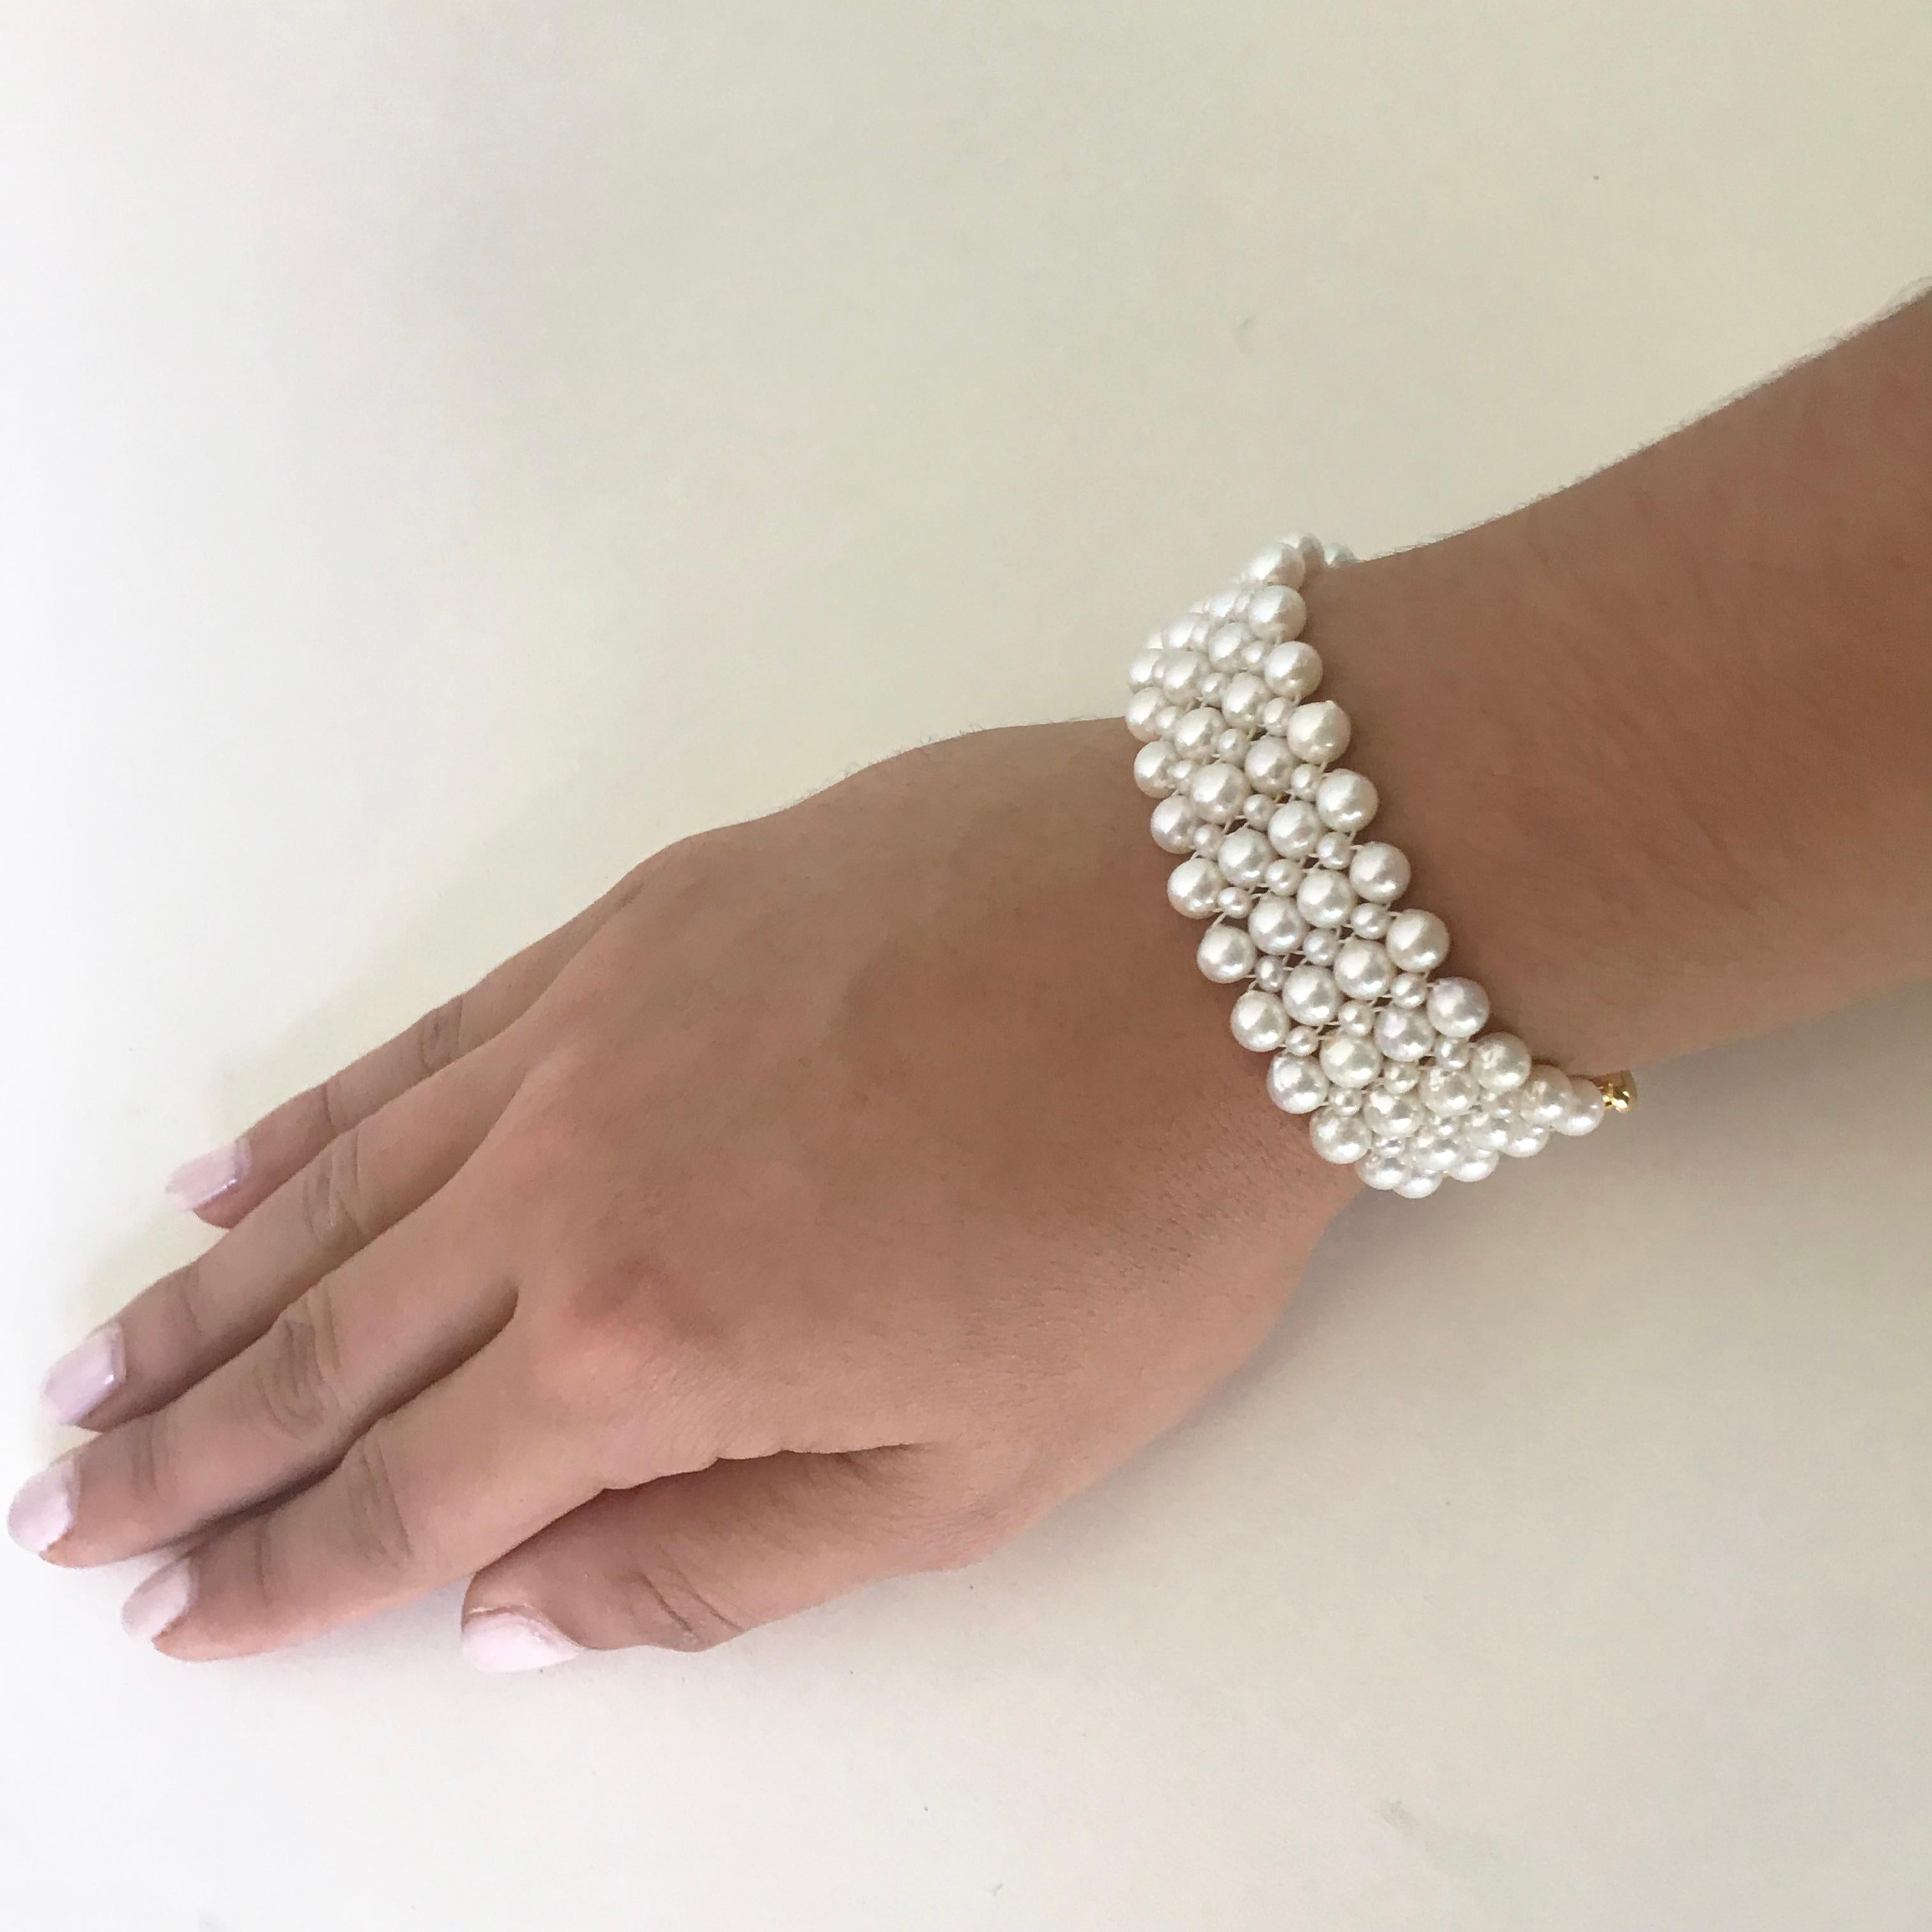 This beautiful, classic and timeless bracelet has elegant pearl weave. At a 1 inches wide the different size pearls (5mm to 2mm) create a checkered design with the sterling silver gold plated clasp.  It is easy to use and secure once fitted on the